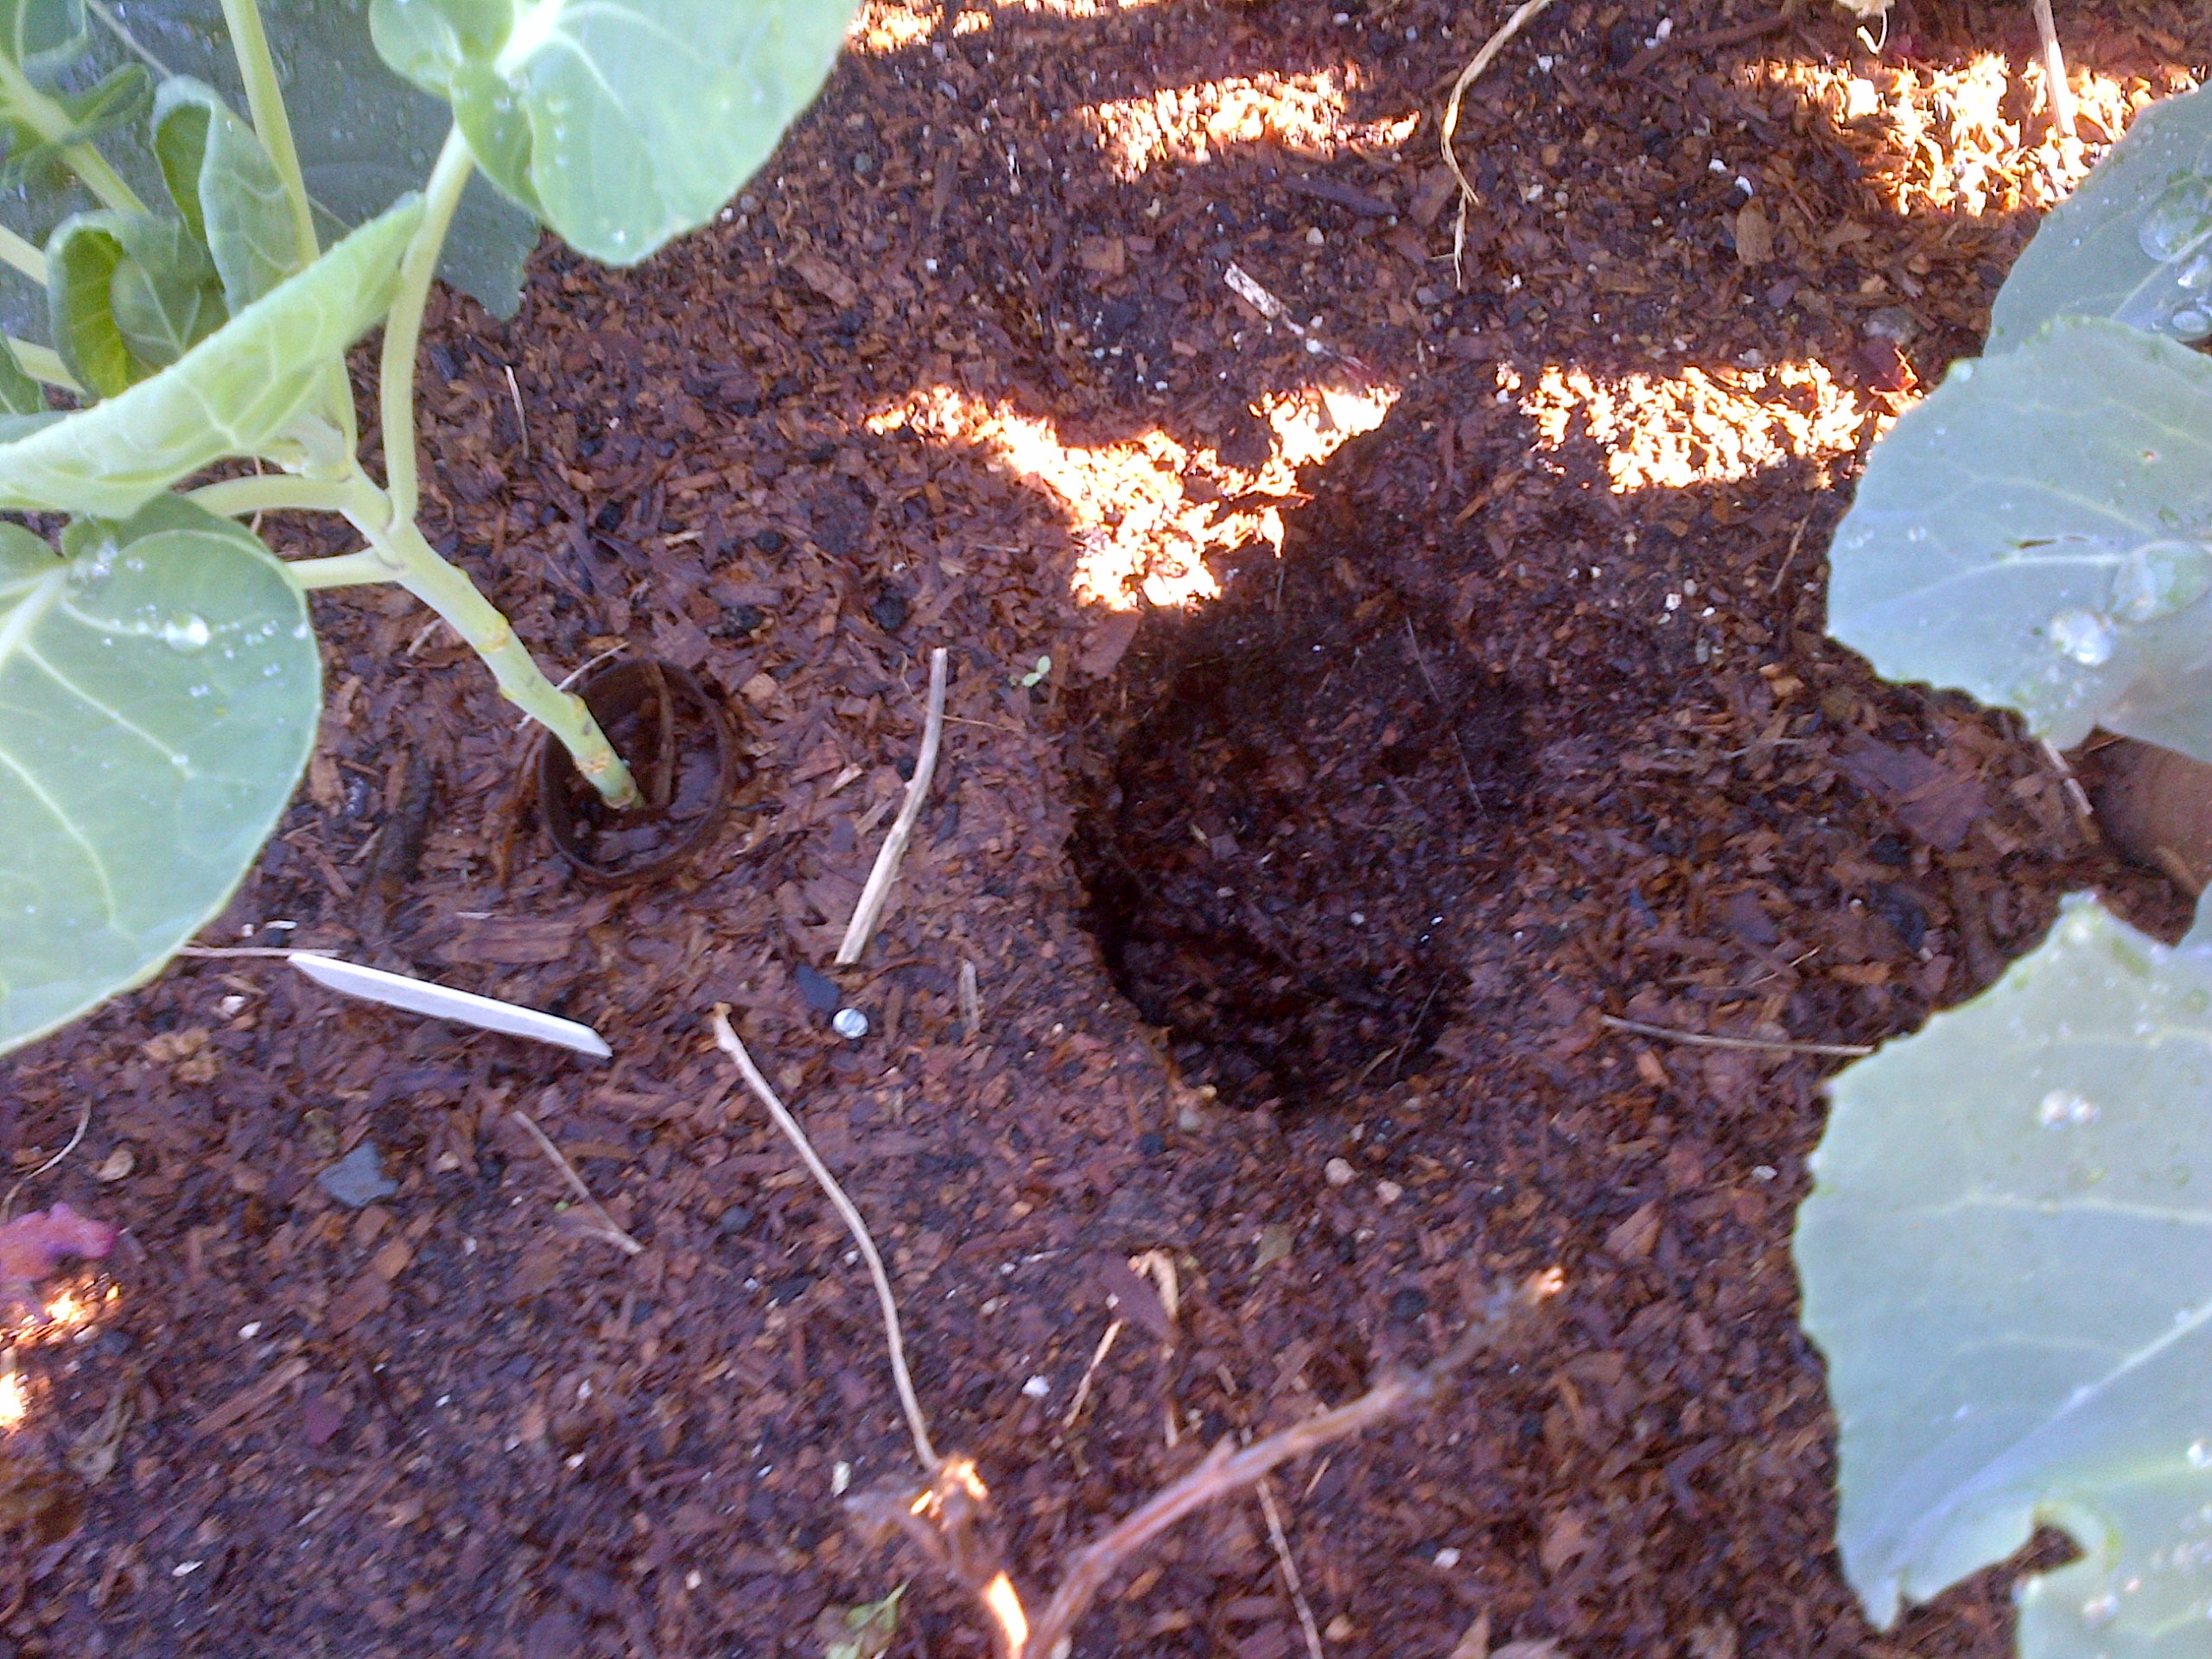 Gopher hole next to a Romanesco plant. Luckily the Romanesco got out alive.